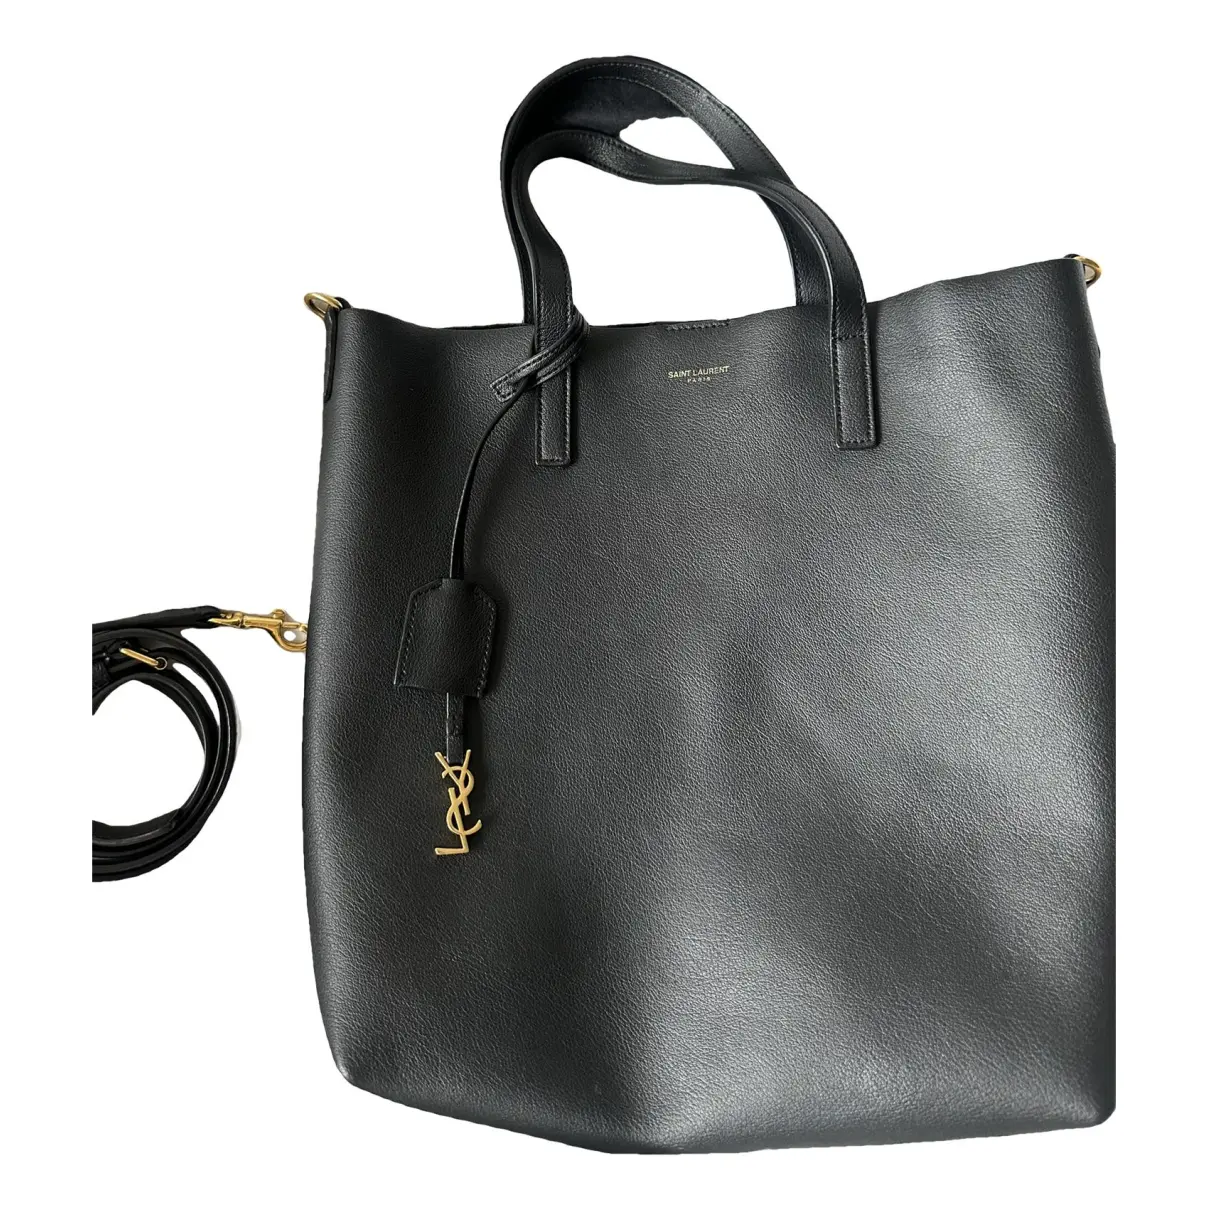 Shopper Toy leather tote